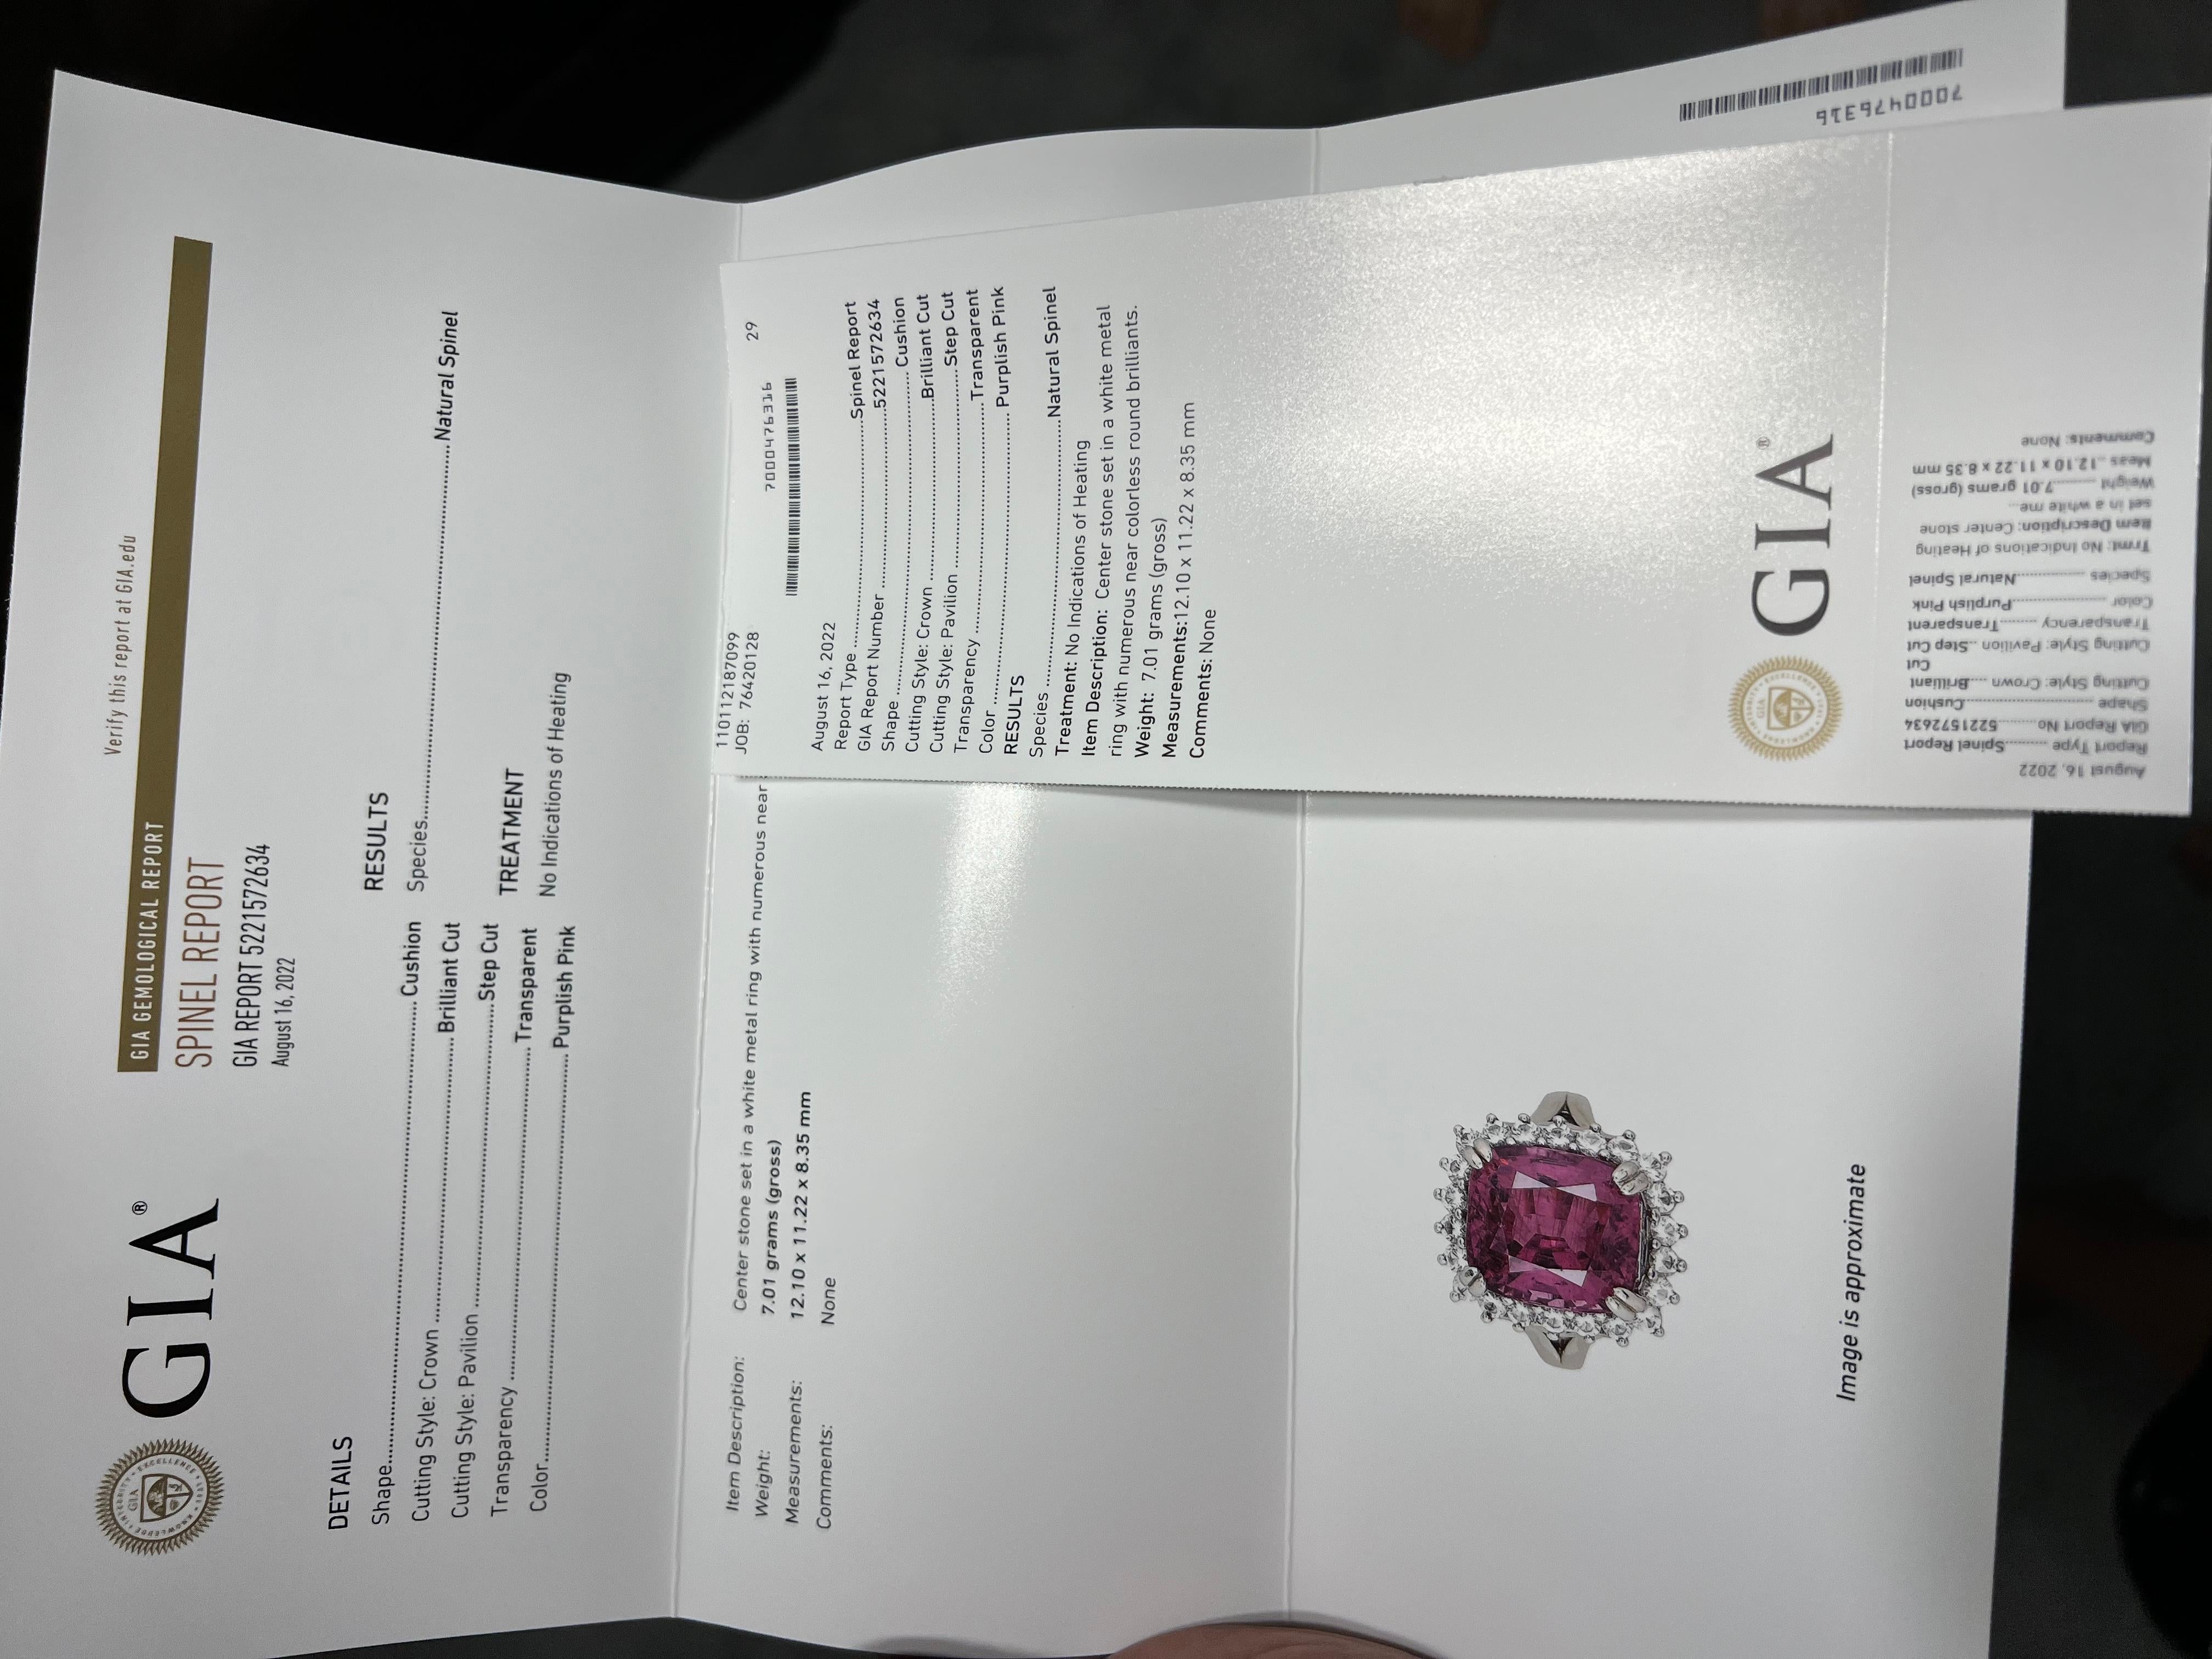 This beautiful GIA certified 10.3 carat Purplish Pink Spinel is one of the once in a lifetime finds and opportunities a savvy collector and fine jewel lover can possess. It has been beautifully Preset in 925 Sterling Silver Ring with natural Topaz